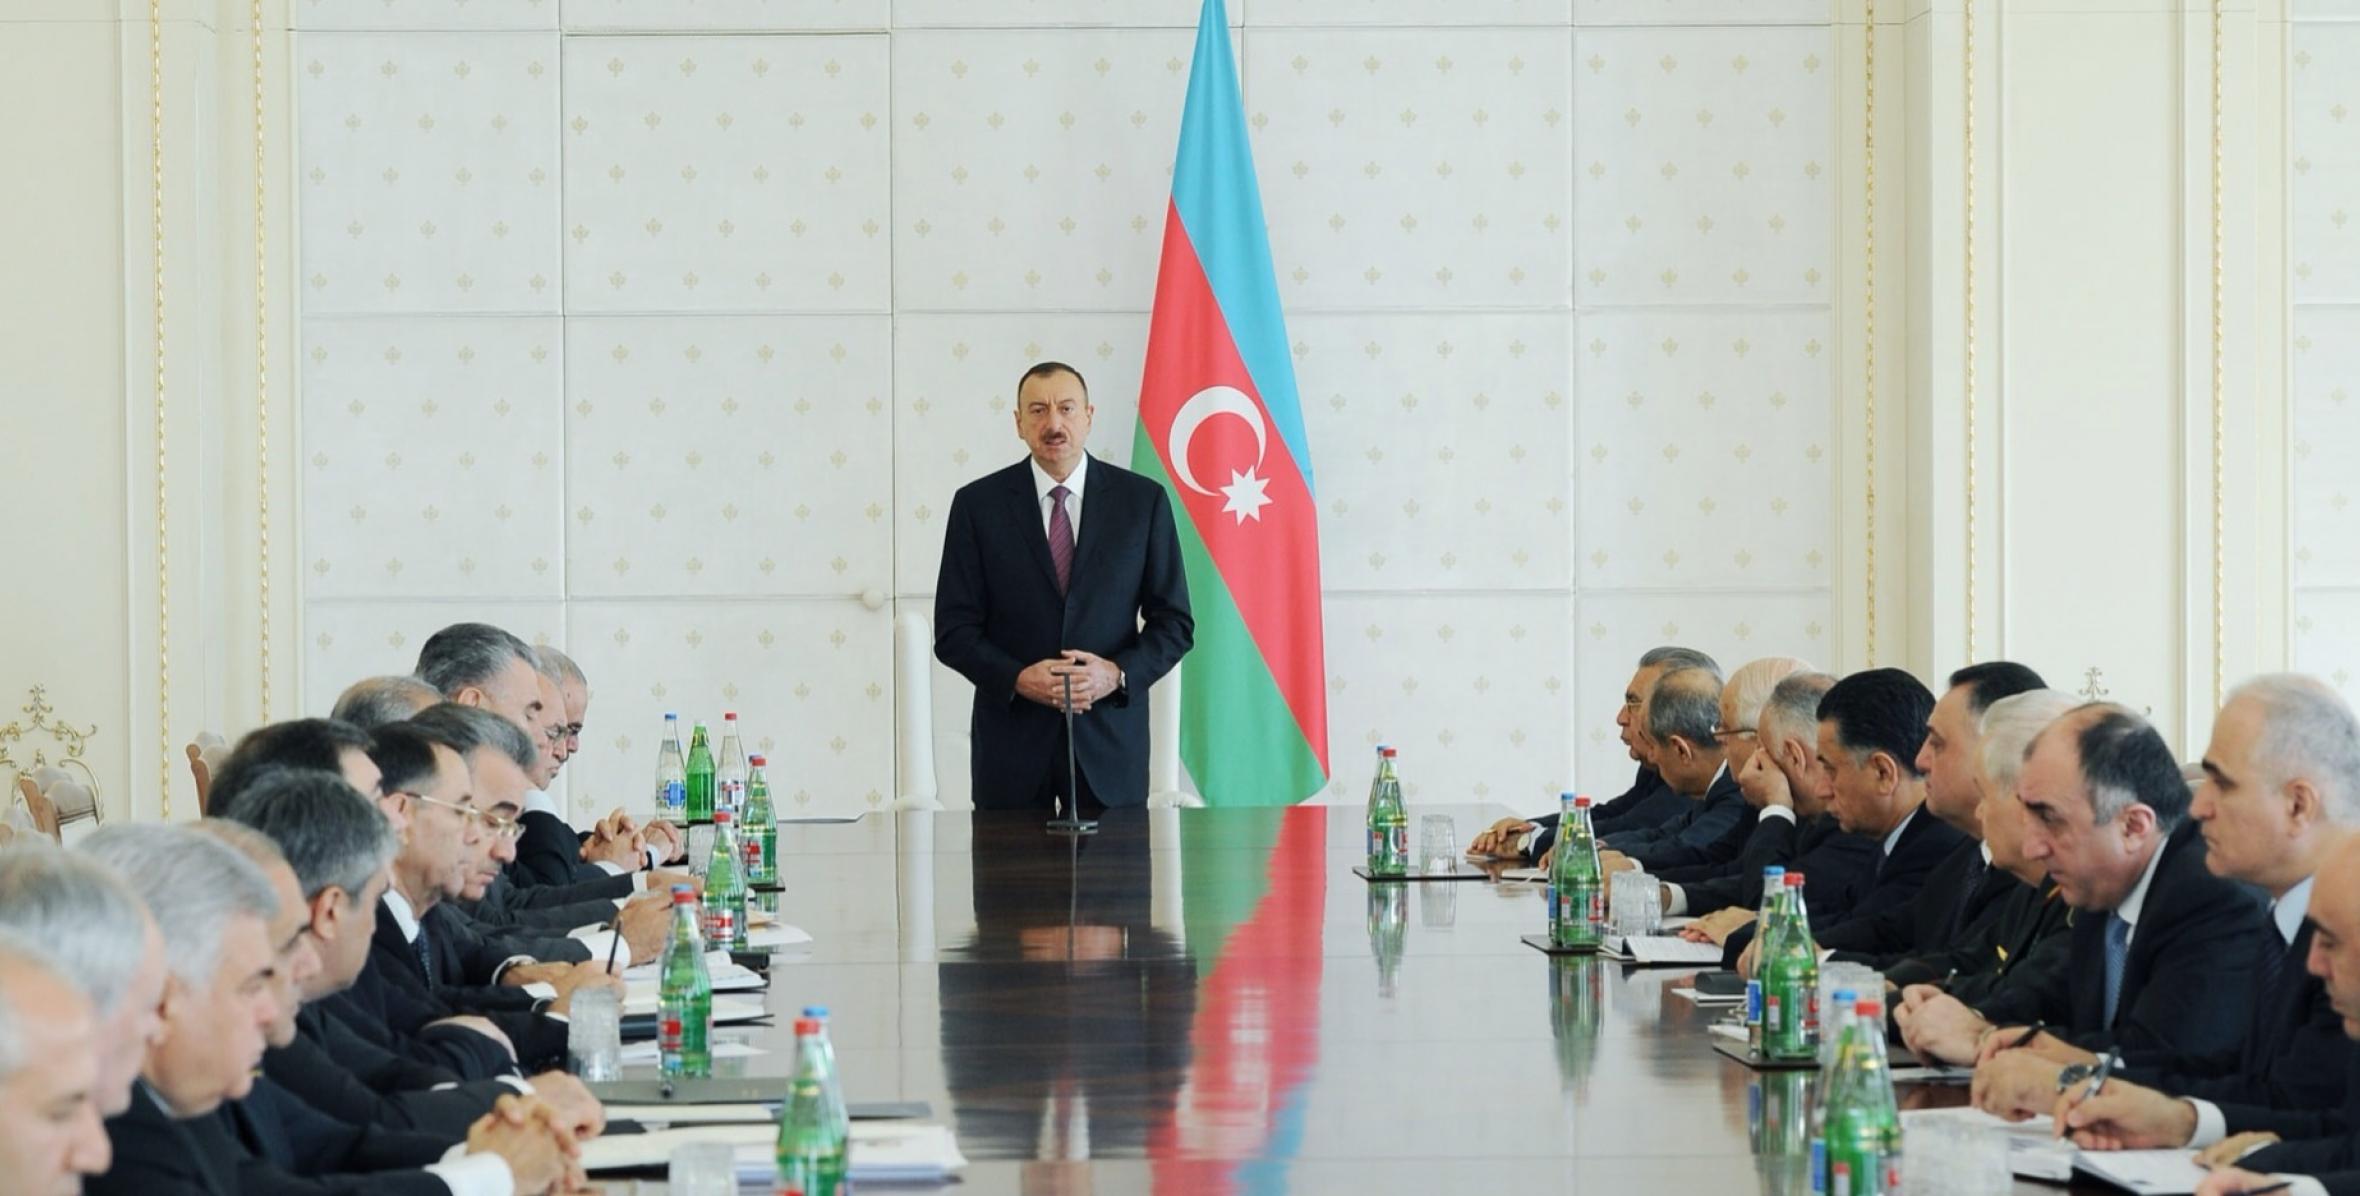 Ilham Aliyev presided over a meeting of the Cabinet of Ministers to discuss the results of the country`s socio-economic development in the first quarter of 2013